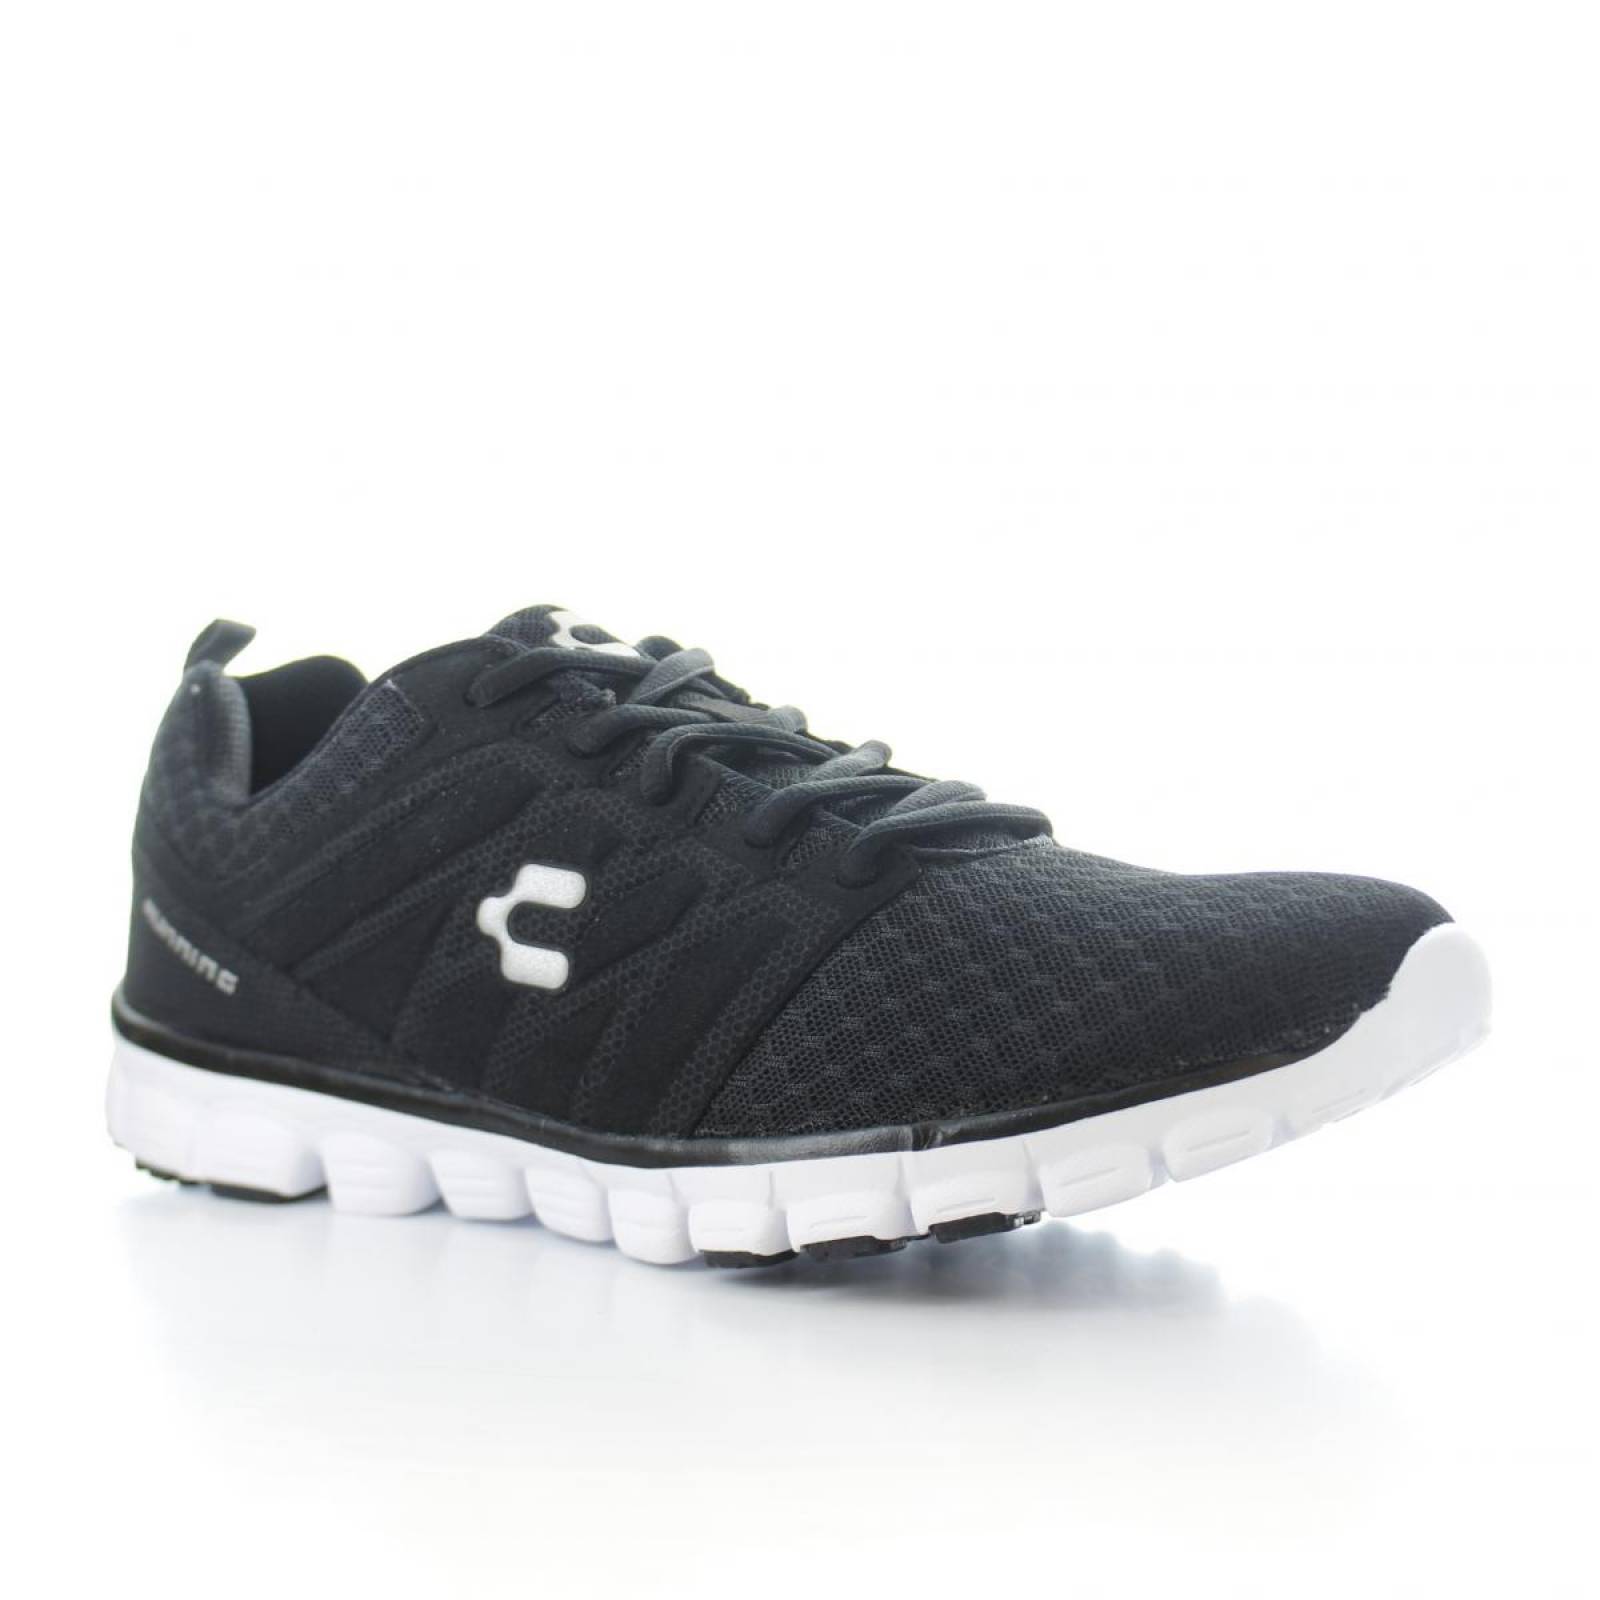 Tenis para Hombre Charly 1021837 041633 Color Negro